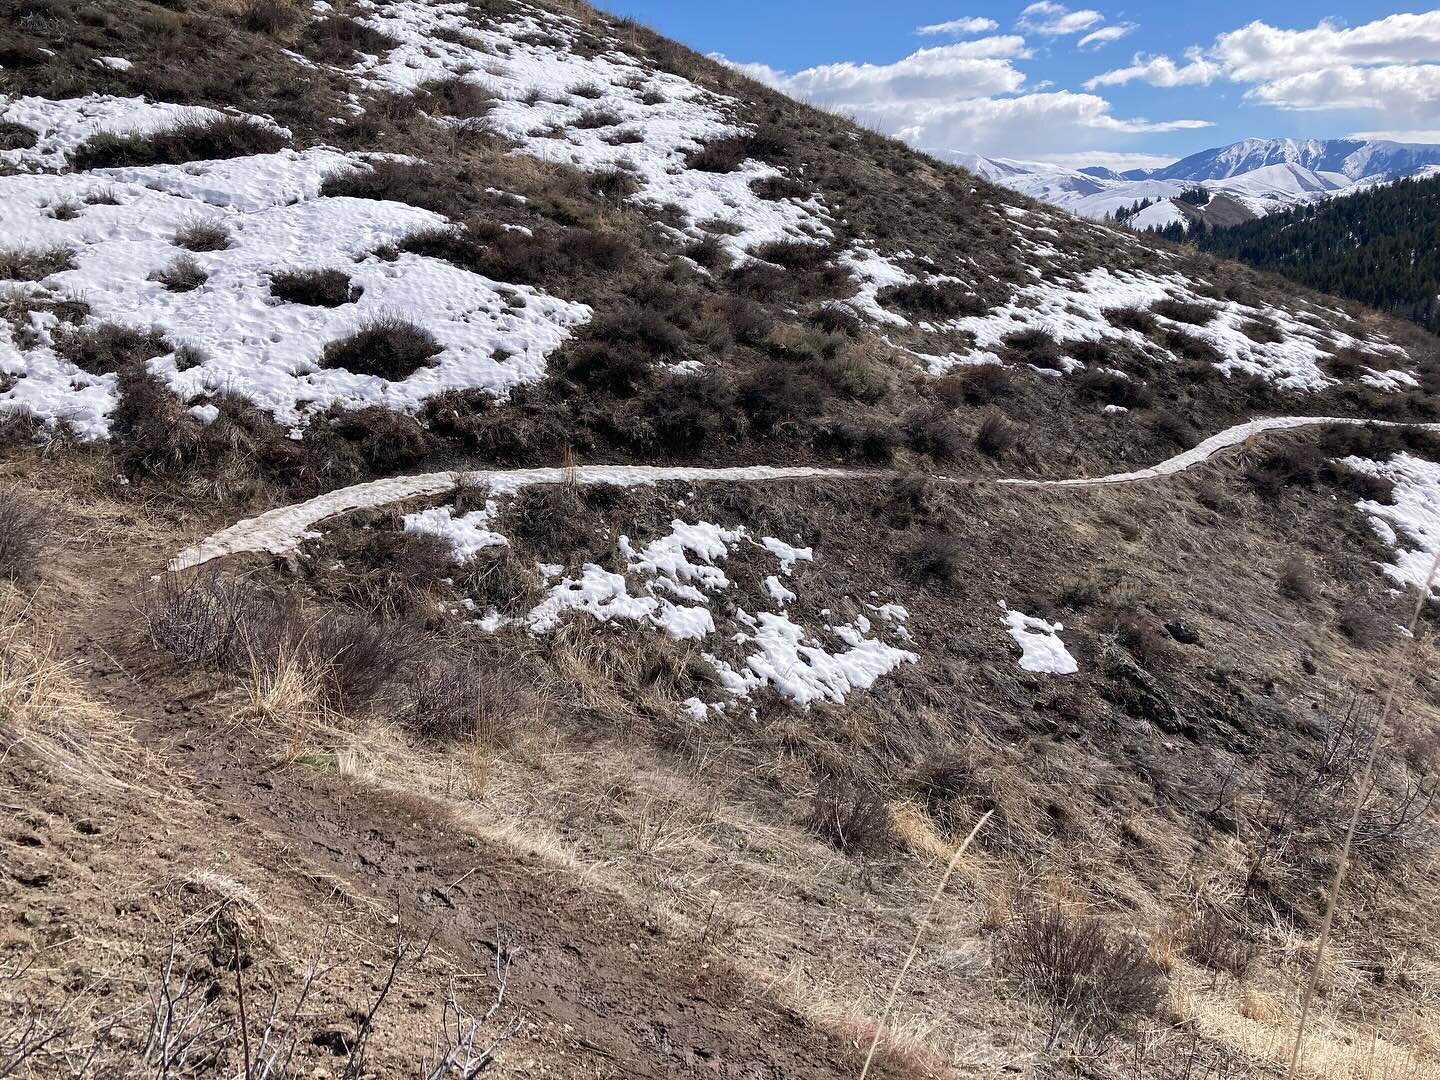 Soil types matter!  When we were hiking in the South Valley, we noticed that really soon after the snow had melted, the soil was firm enough to hike or ride on.  Not so much in the North!  The soil up north has a little less sand and a little more cl